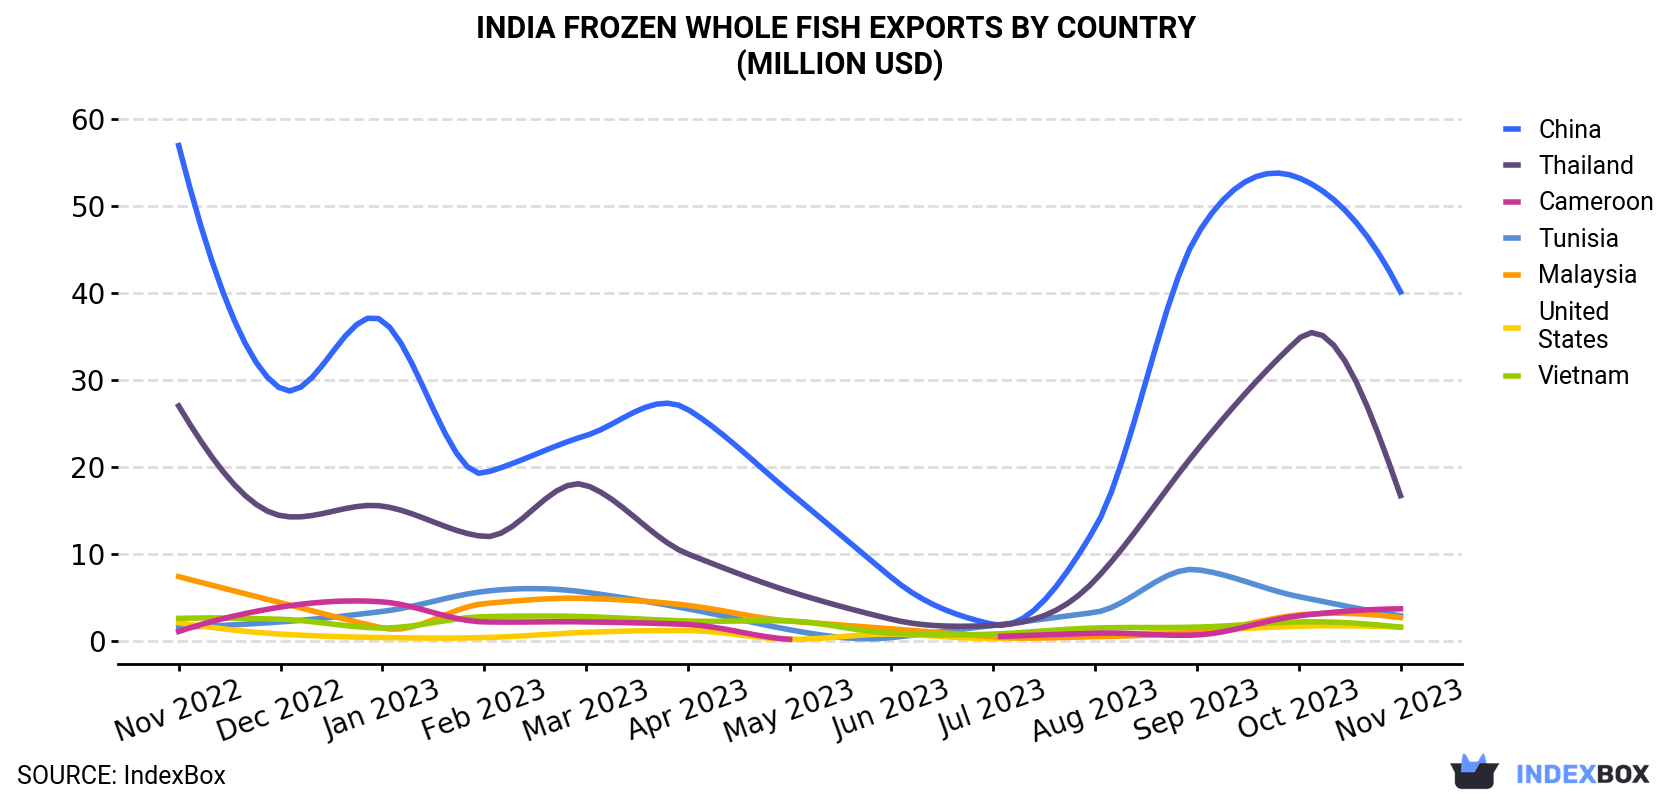 India Frozen Whole Fish Exports By Country (Million USD)